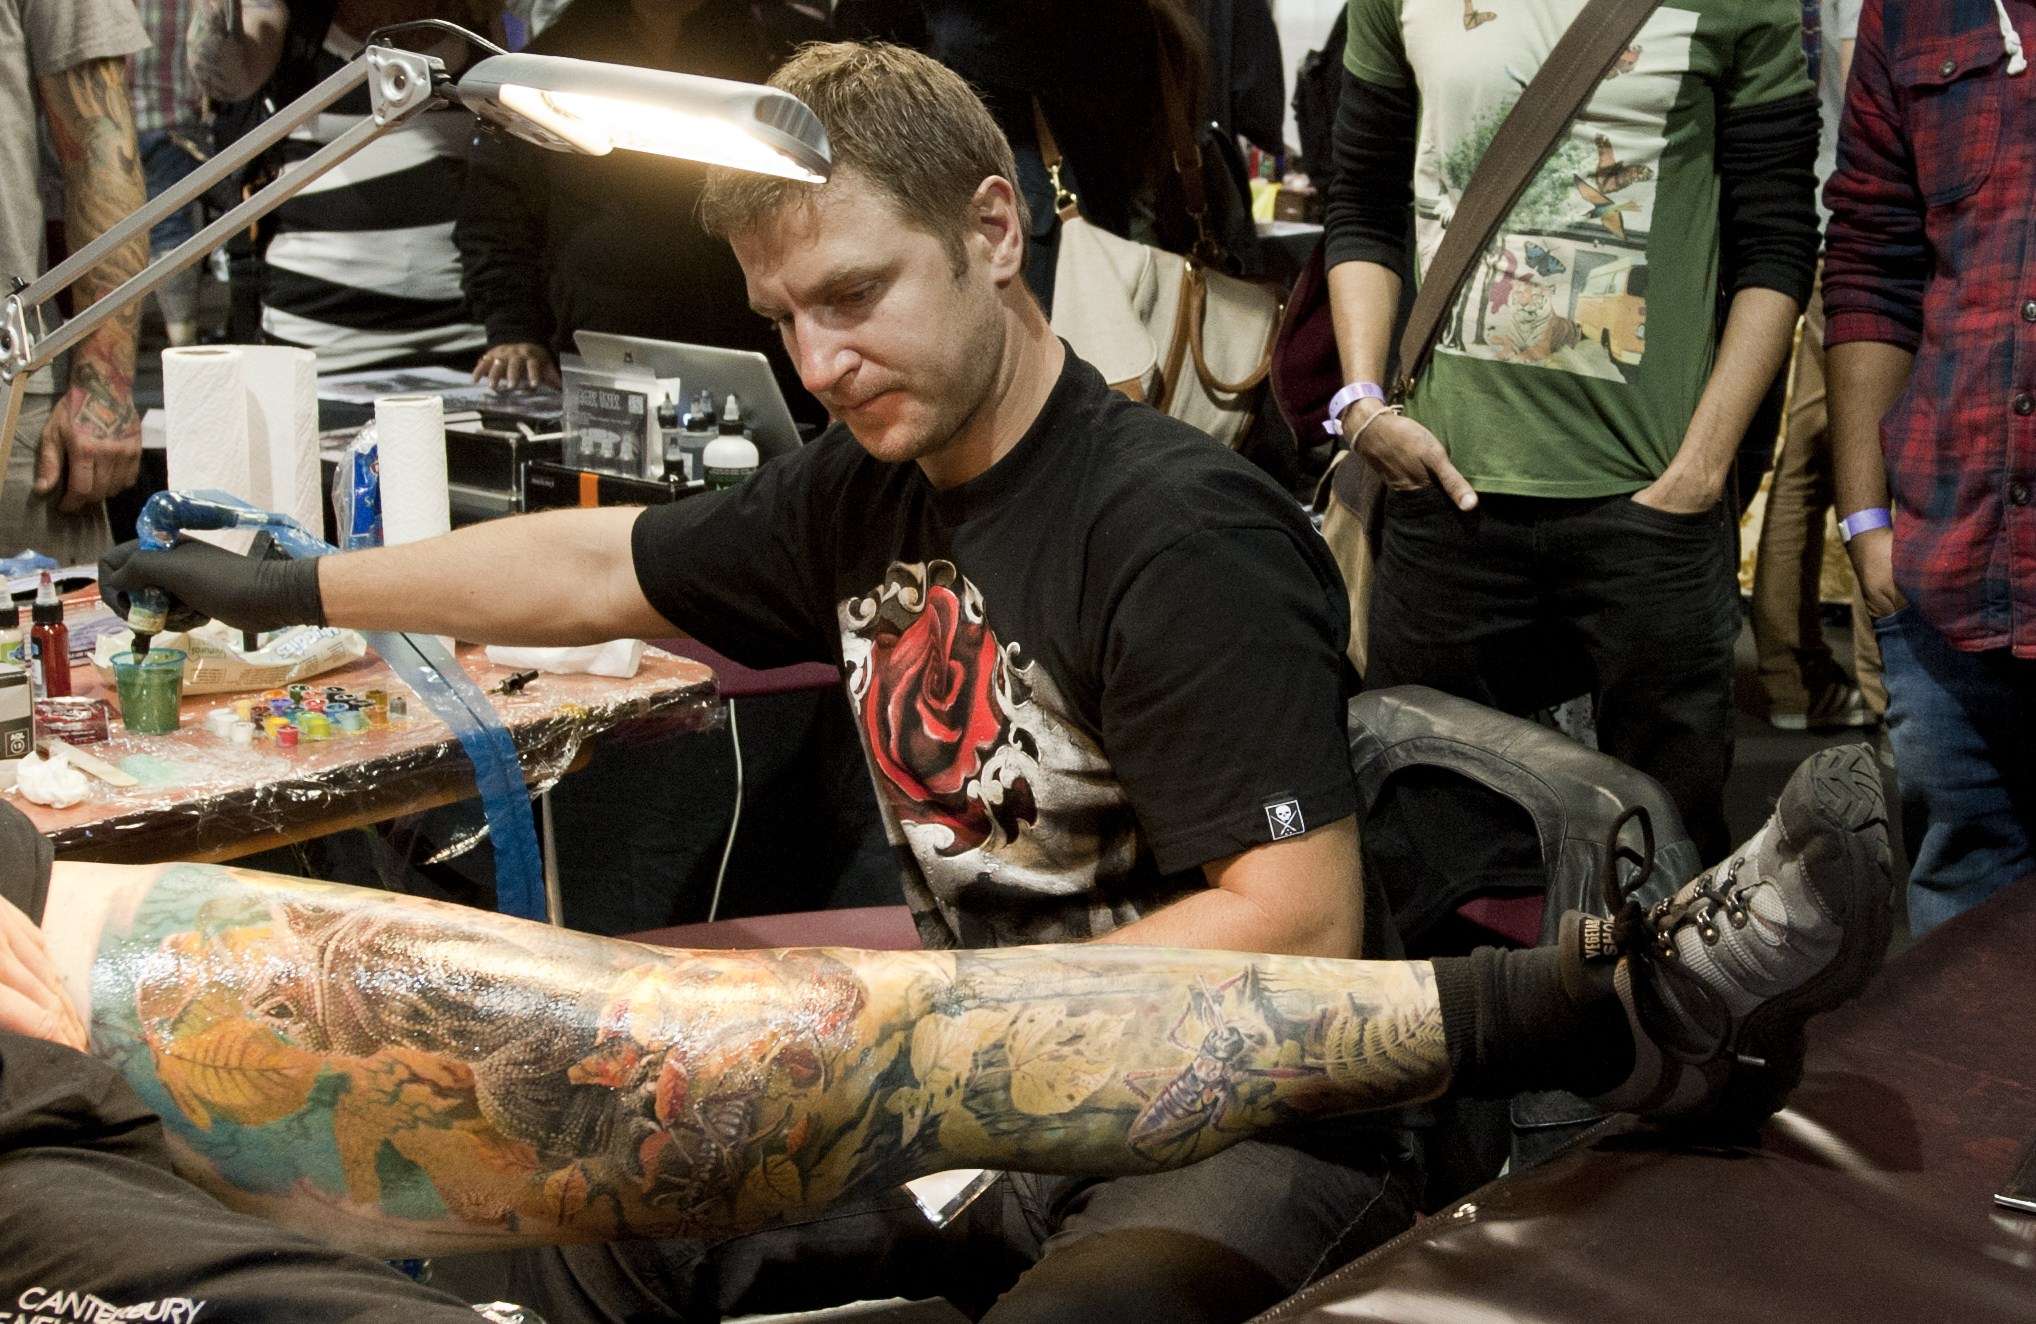 Gallery: The International London Tattoo Convention 2013